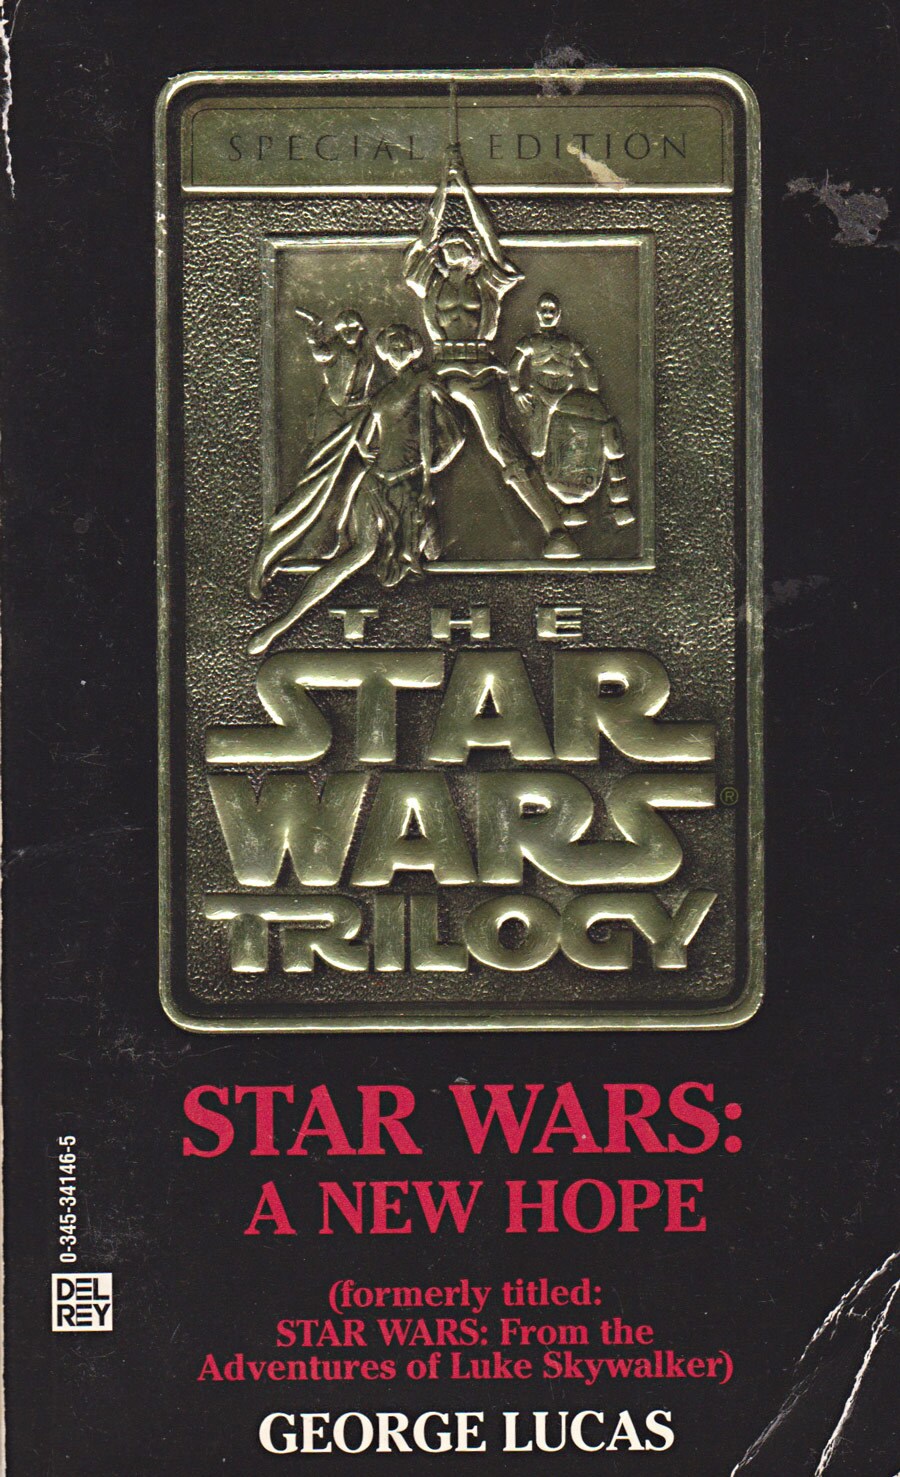 The gold-embossed special edition cover of the book Star Wars: A New Hope, by George Lucas. The cover features Han, Leia, Luke, R2, and C-3PO.